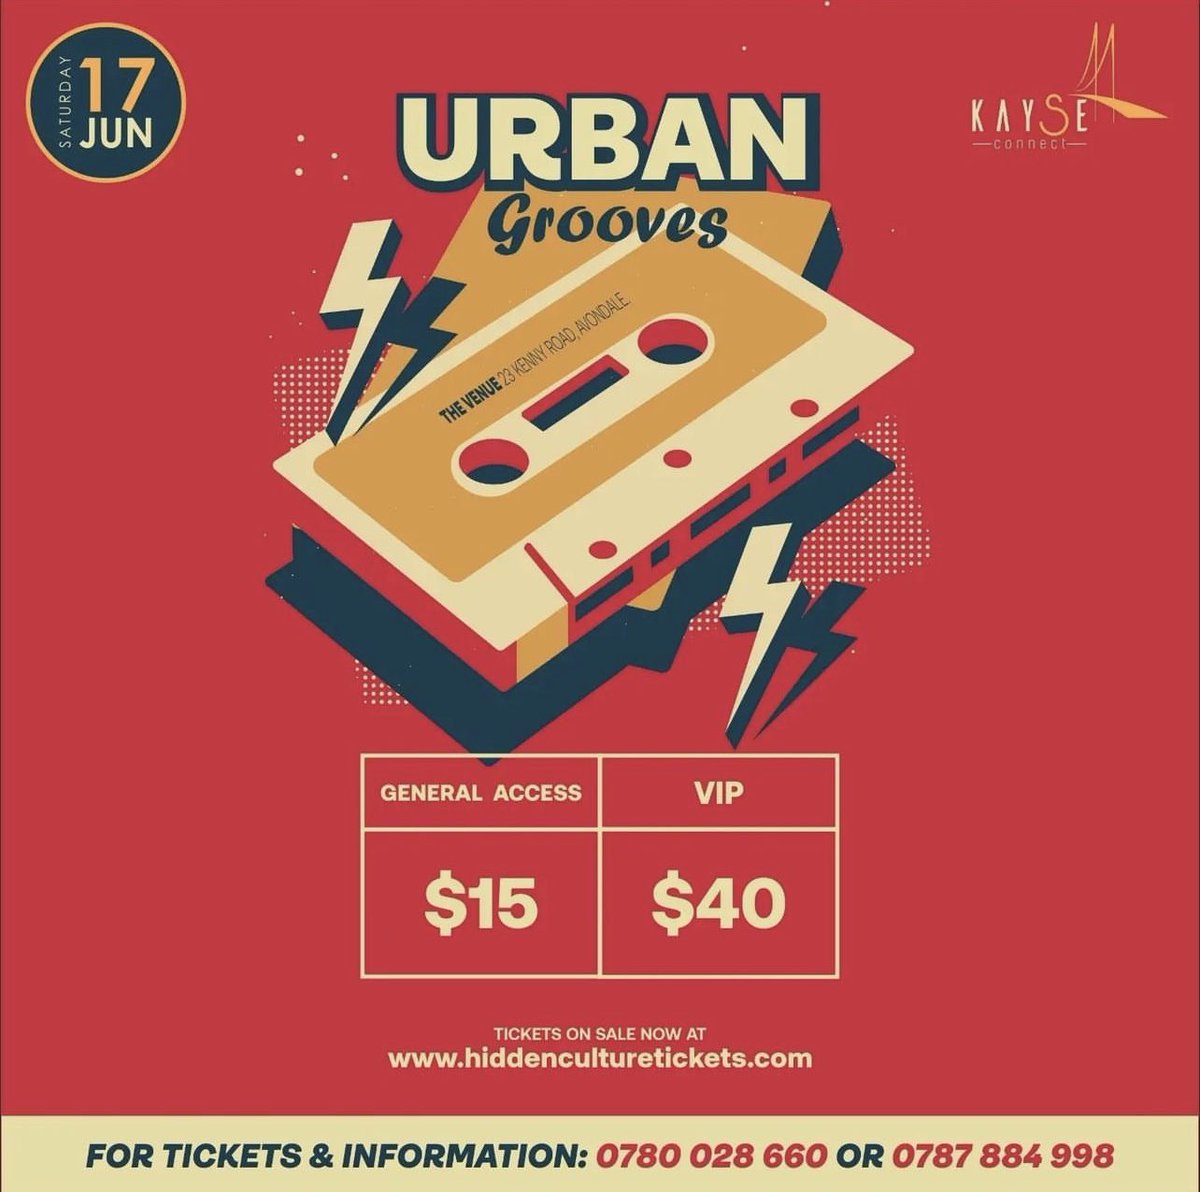 @Washymoyo @exq @StoroLoston @capitalkfm Urban Grooves was never a genre but a movement. Come to the Venue in Avondale on the 17th of June and get enough answers.